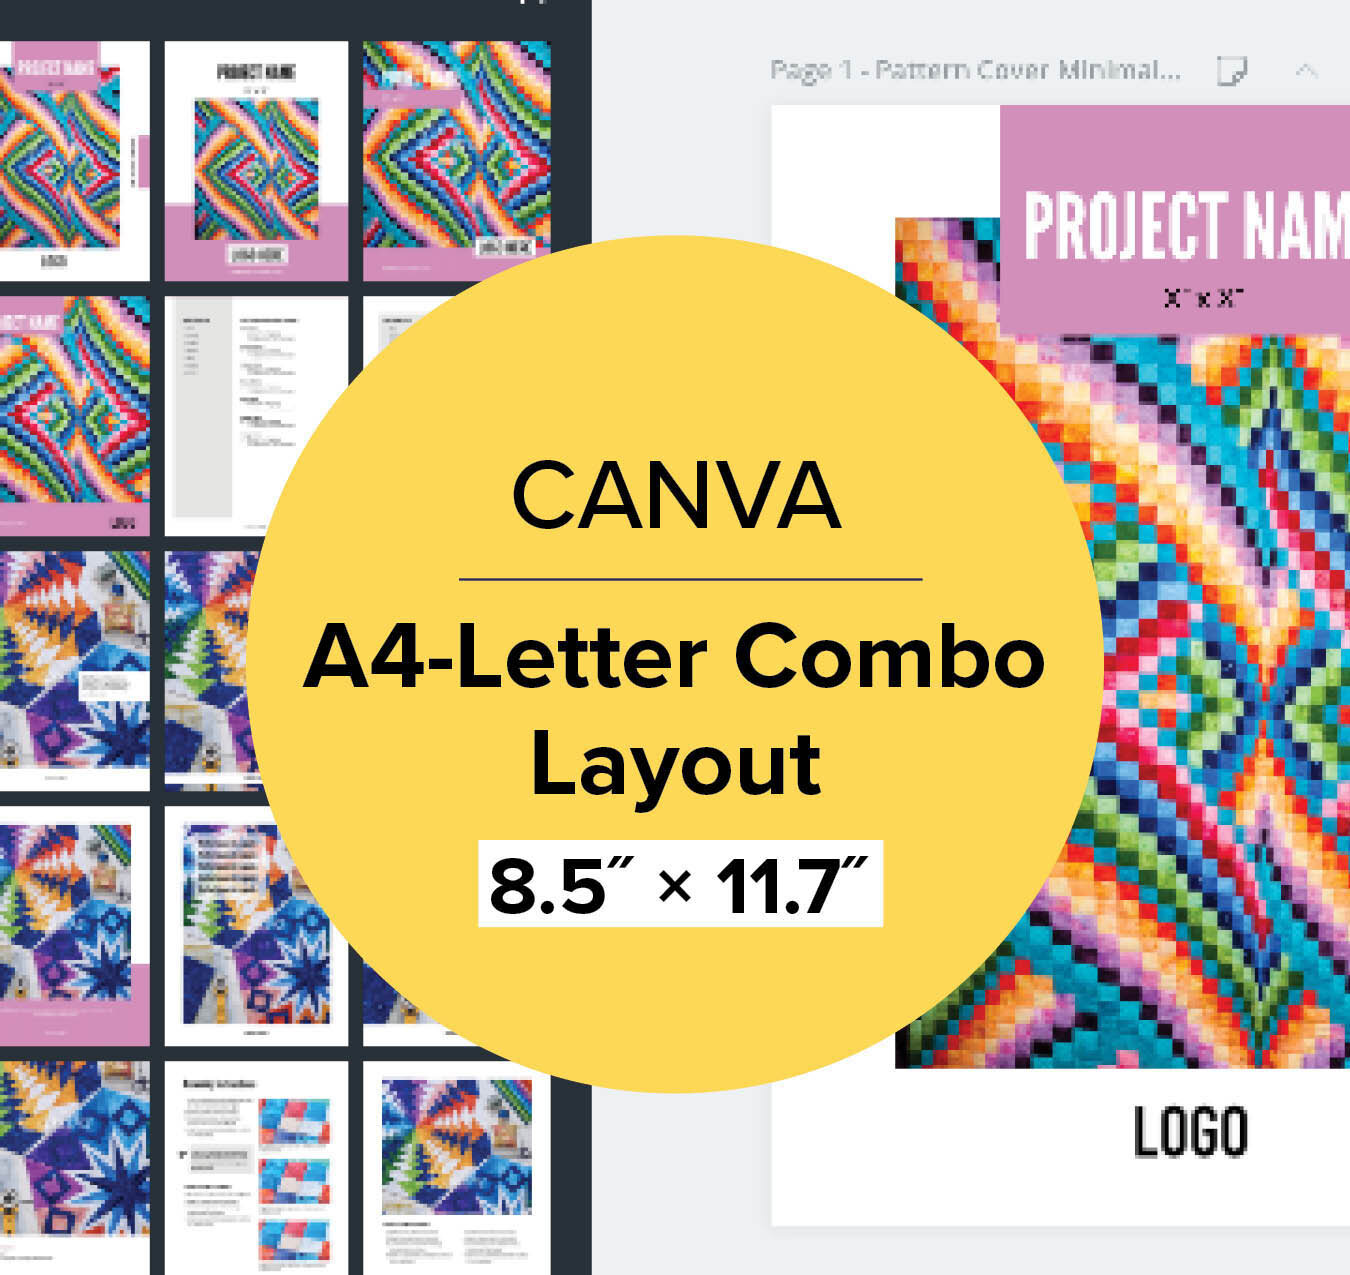 Introducing the A4-Letter Combo Template! ⁣
⁣
Worry no more about where your customers are printing your pattern from, this template is formatted to print on both A4 AND Letter paper. ⁣
⁣
Keep content within the bottom margins (for letter-sized), tuc